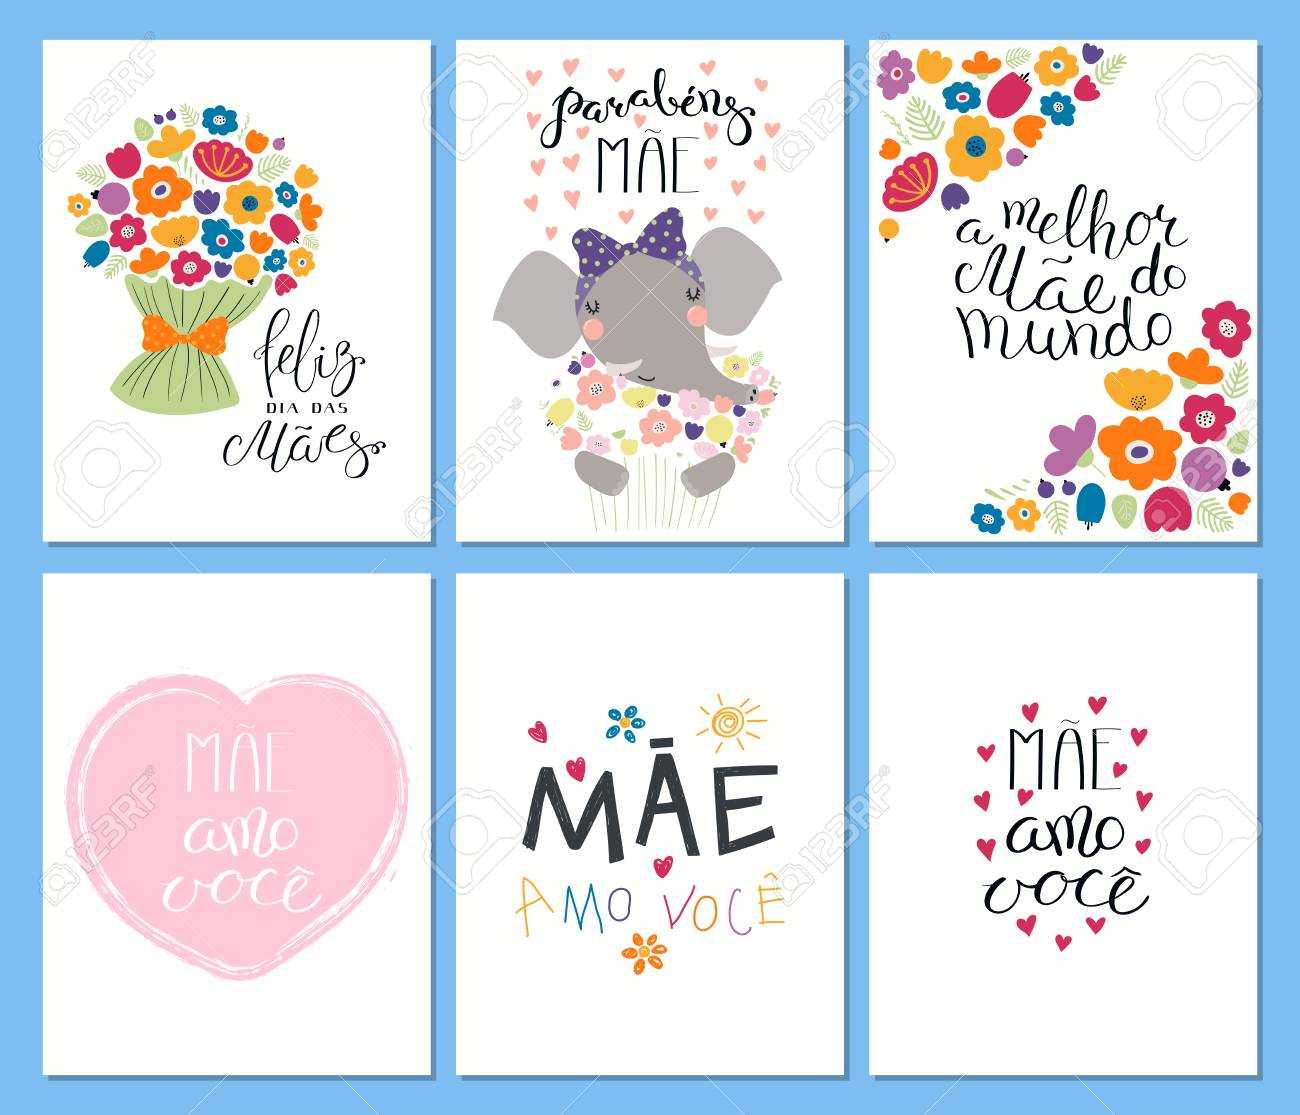 Set Of Mother's Day Cards Templates With Quotes In Portuguese Pertaining To Mothers Day Card Templates